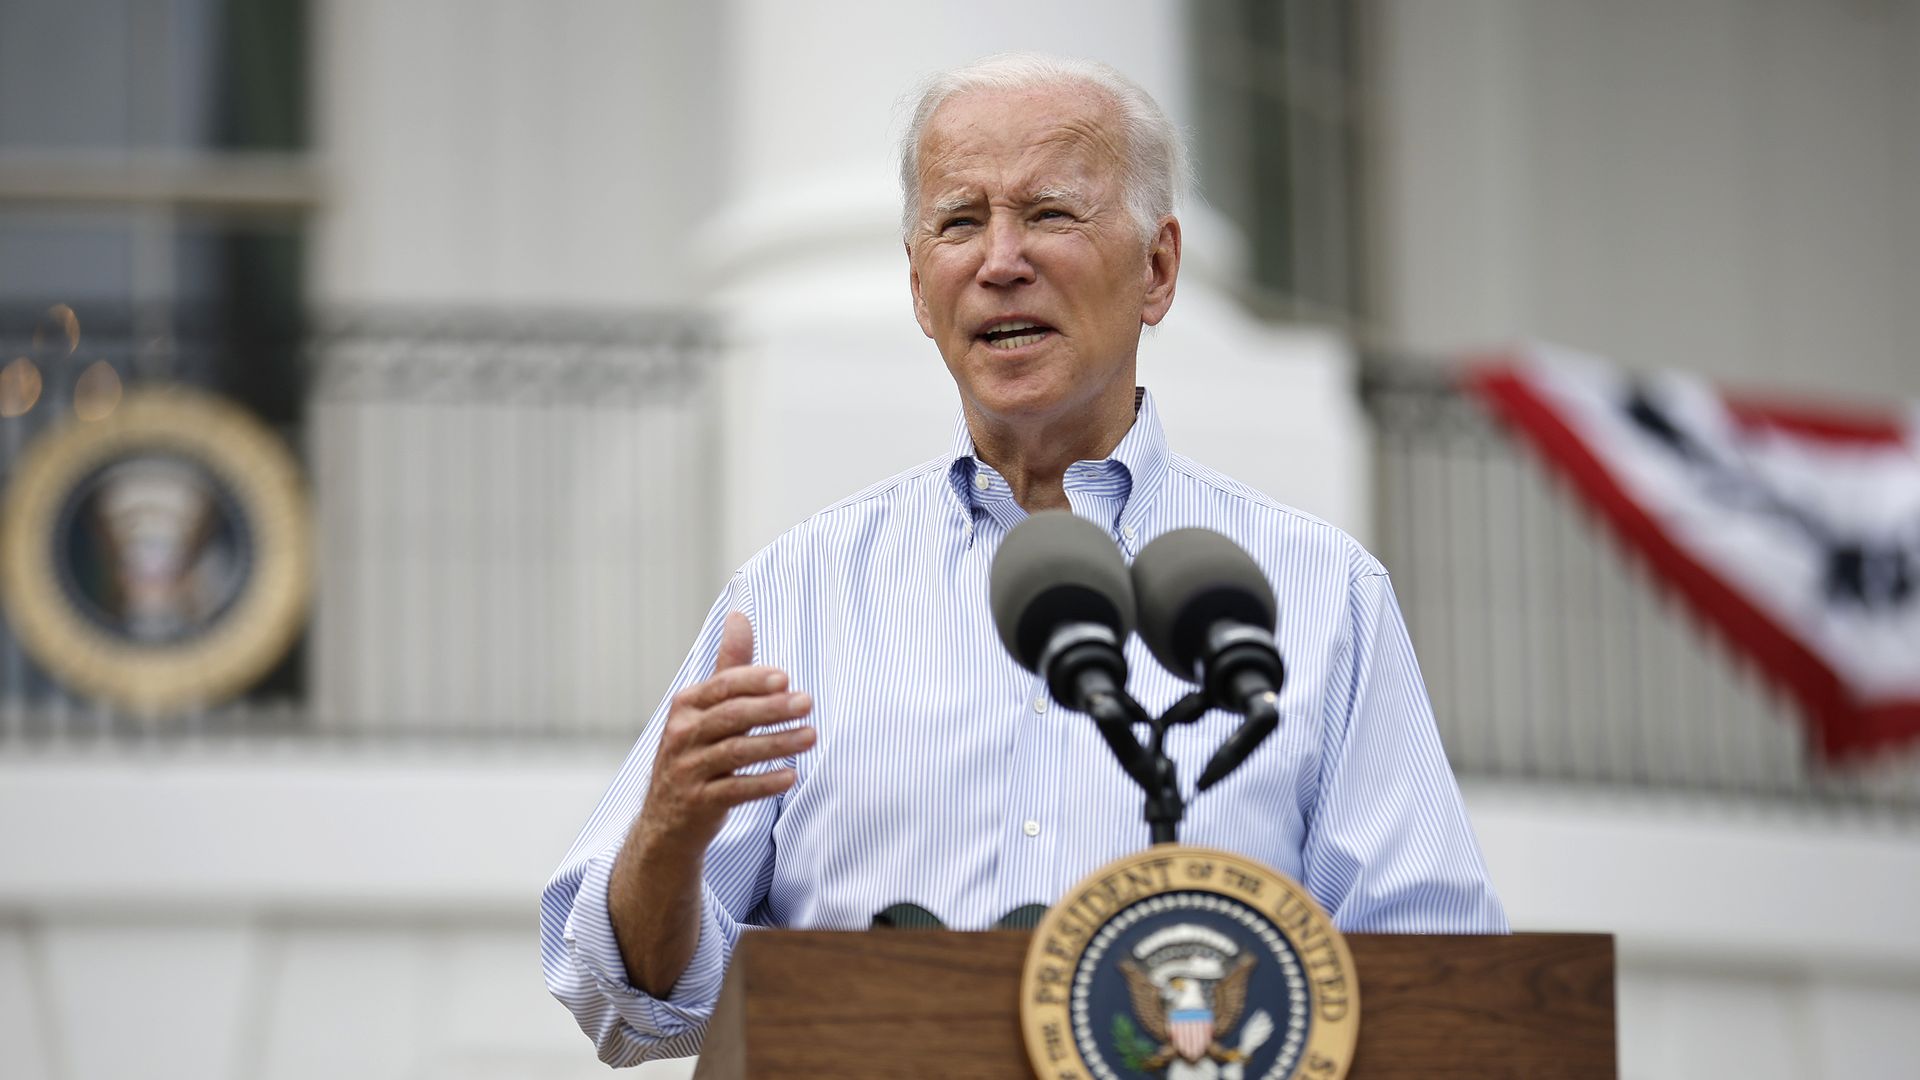 President Joe Biden delivers brief remarks during the Congressional Picnic on the South Lawn of the White House on July 12, 2022